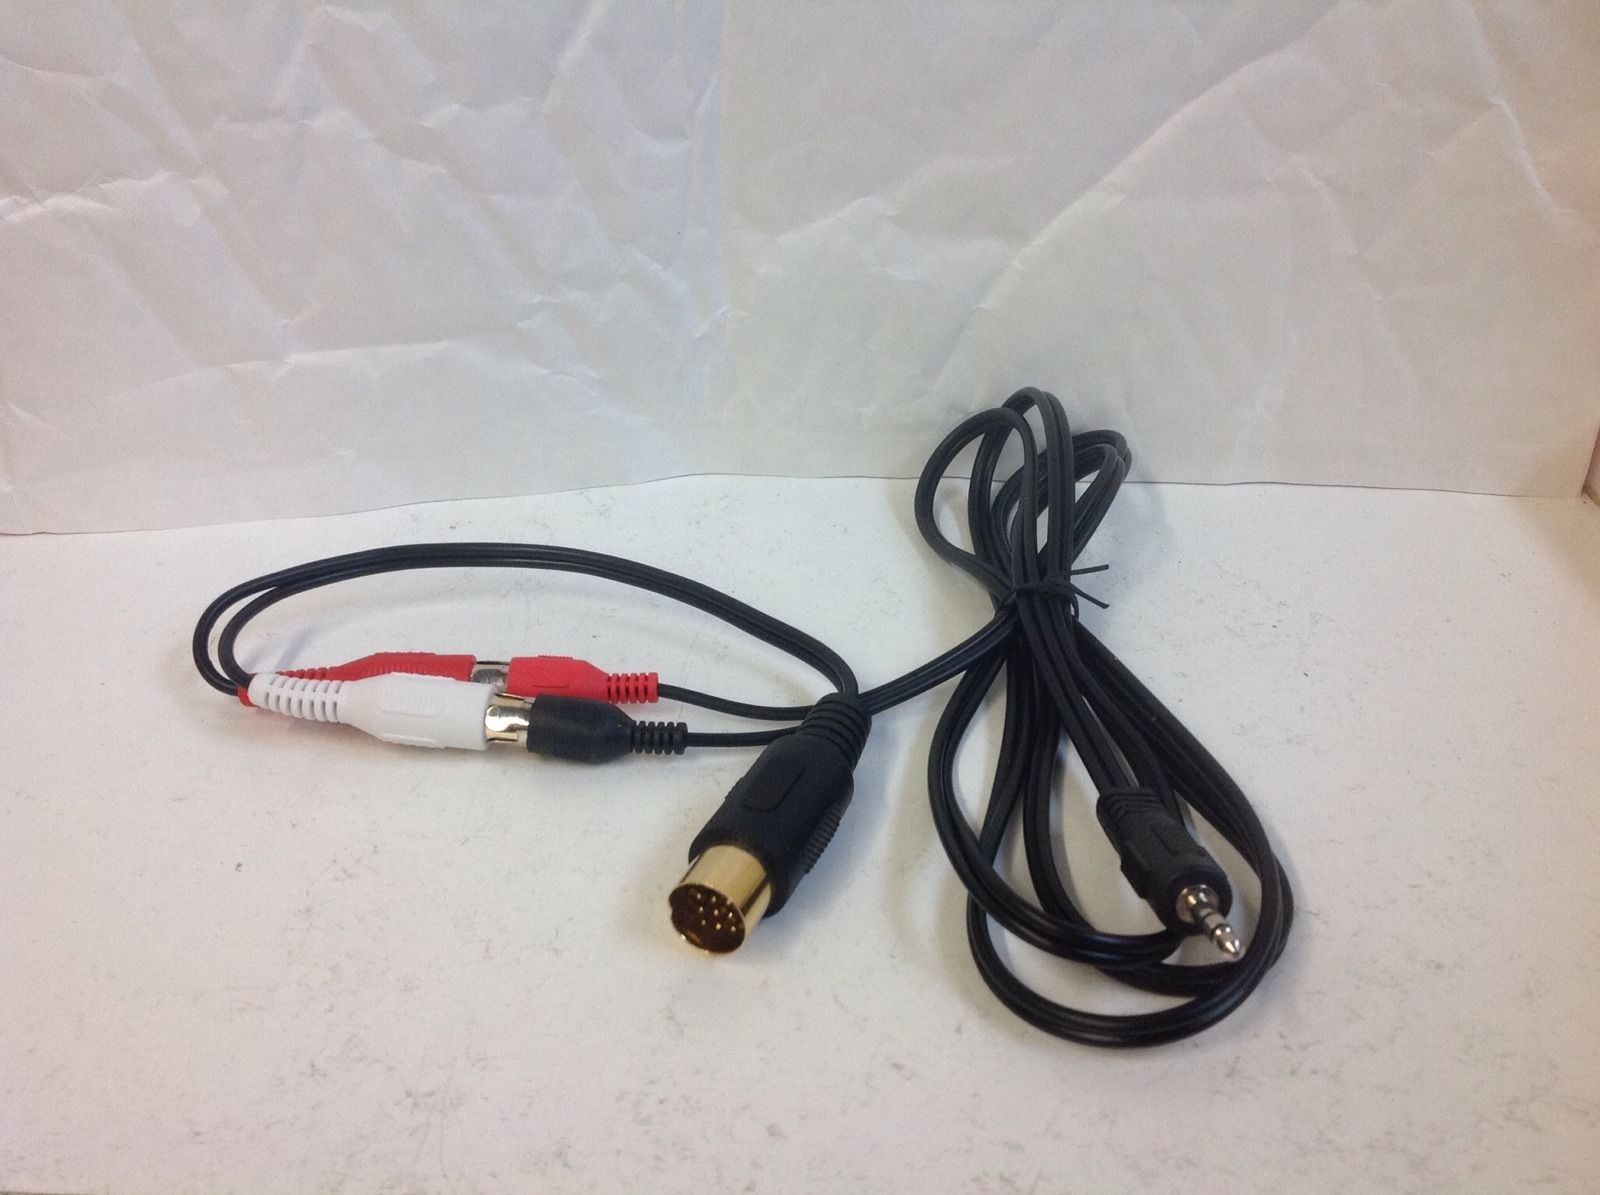 Kenwood Kdc-W7031 Car Audio Stereo Aux In Cable To 3.5 Jack Lead Wiring Harness